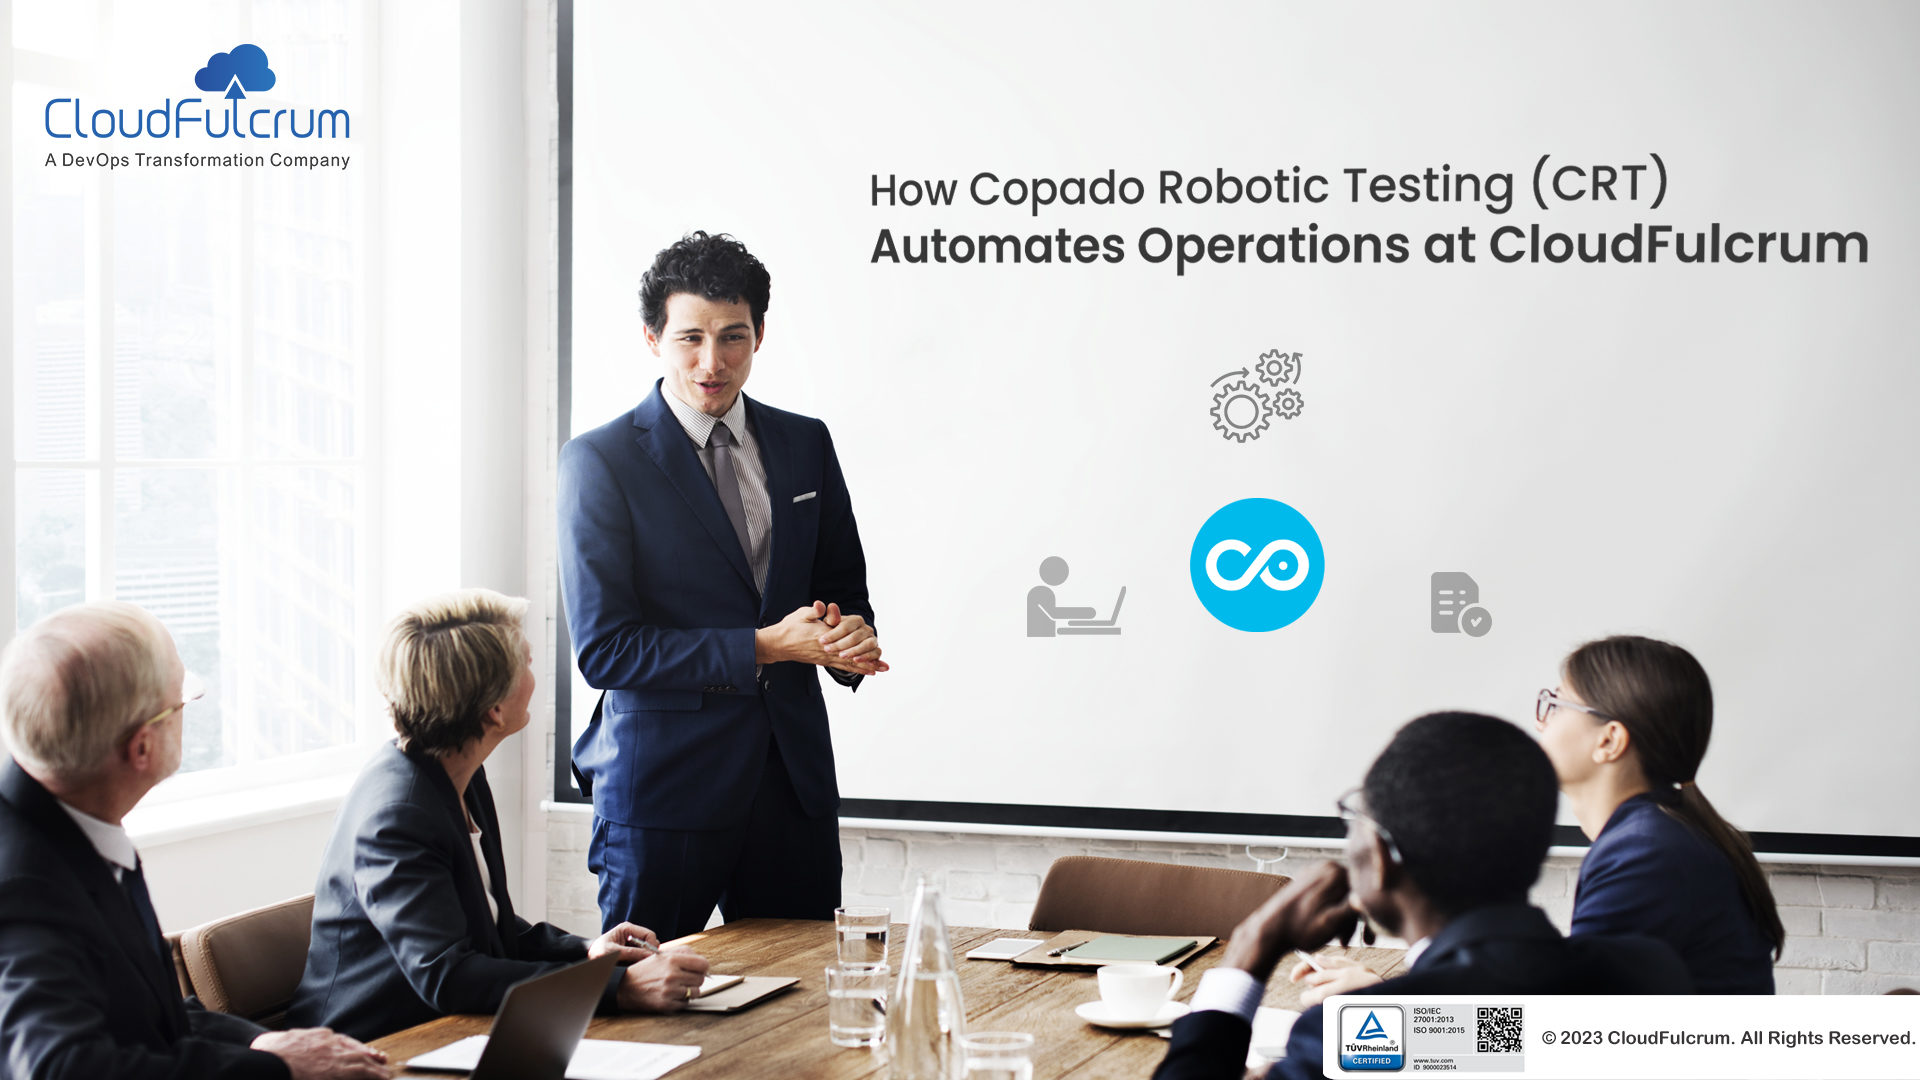 Streamlining Business Processes: How Copado Robotic Testing (CRT) Automates Operations at CloudFulcrum